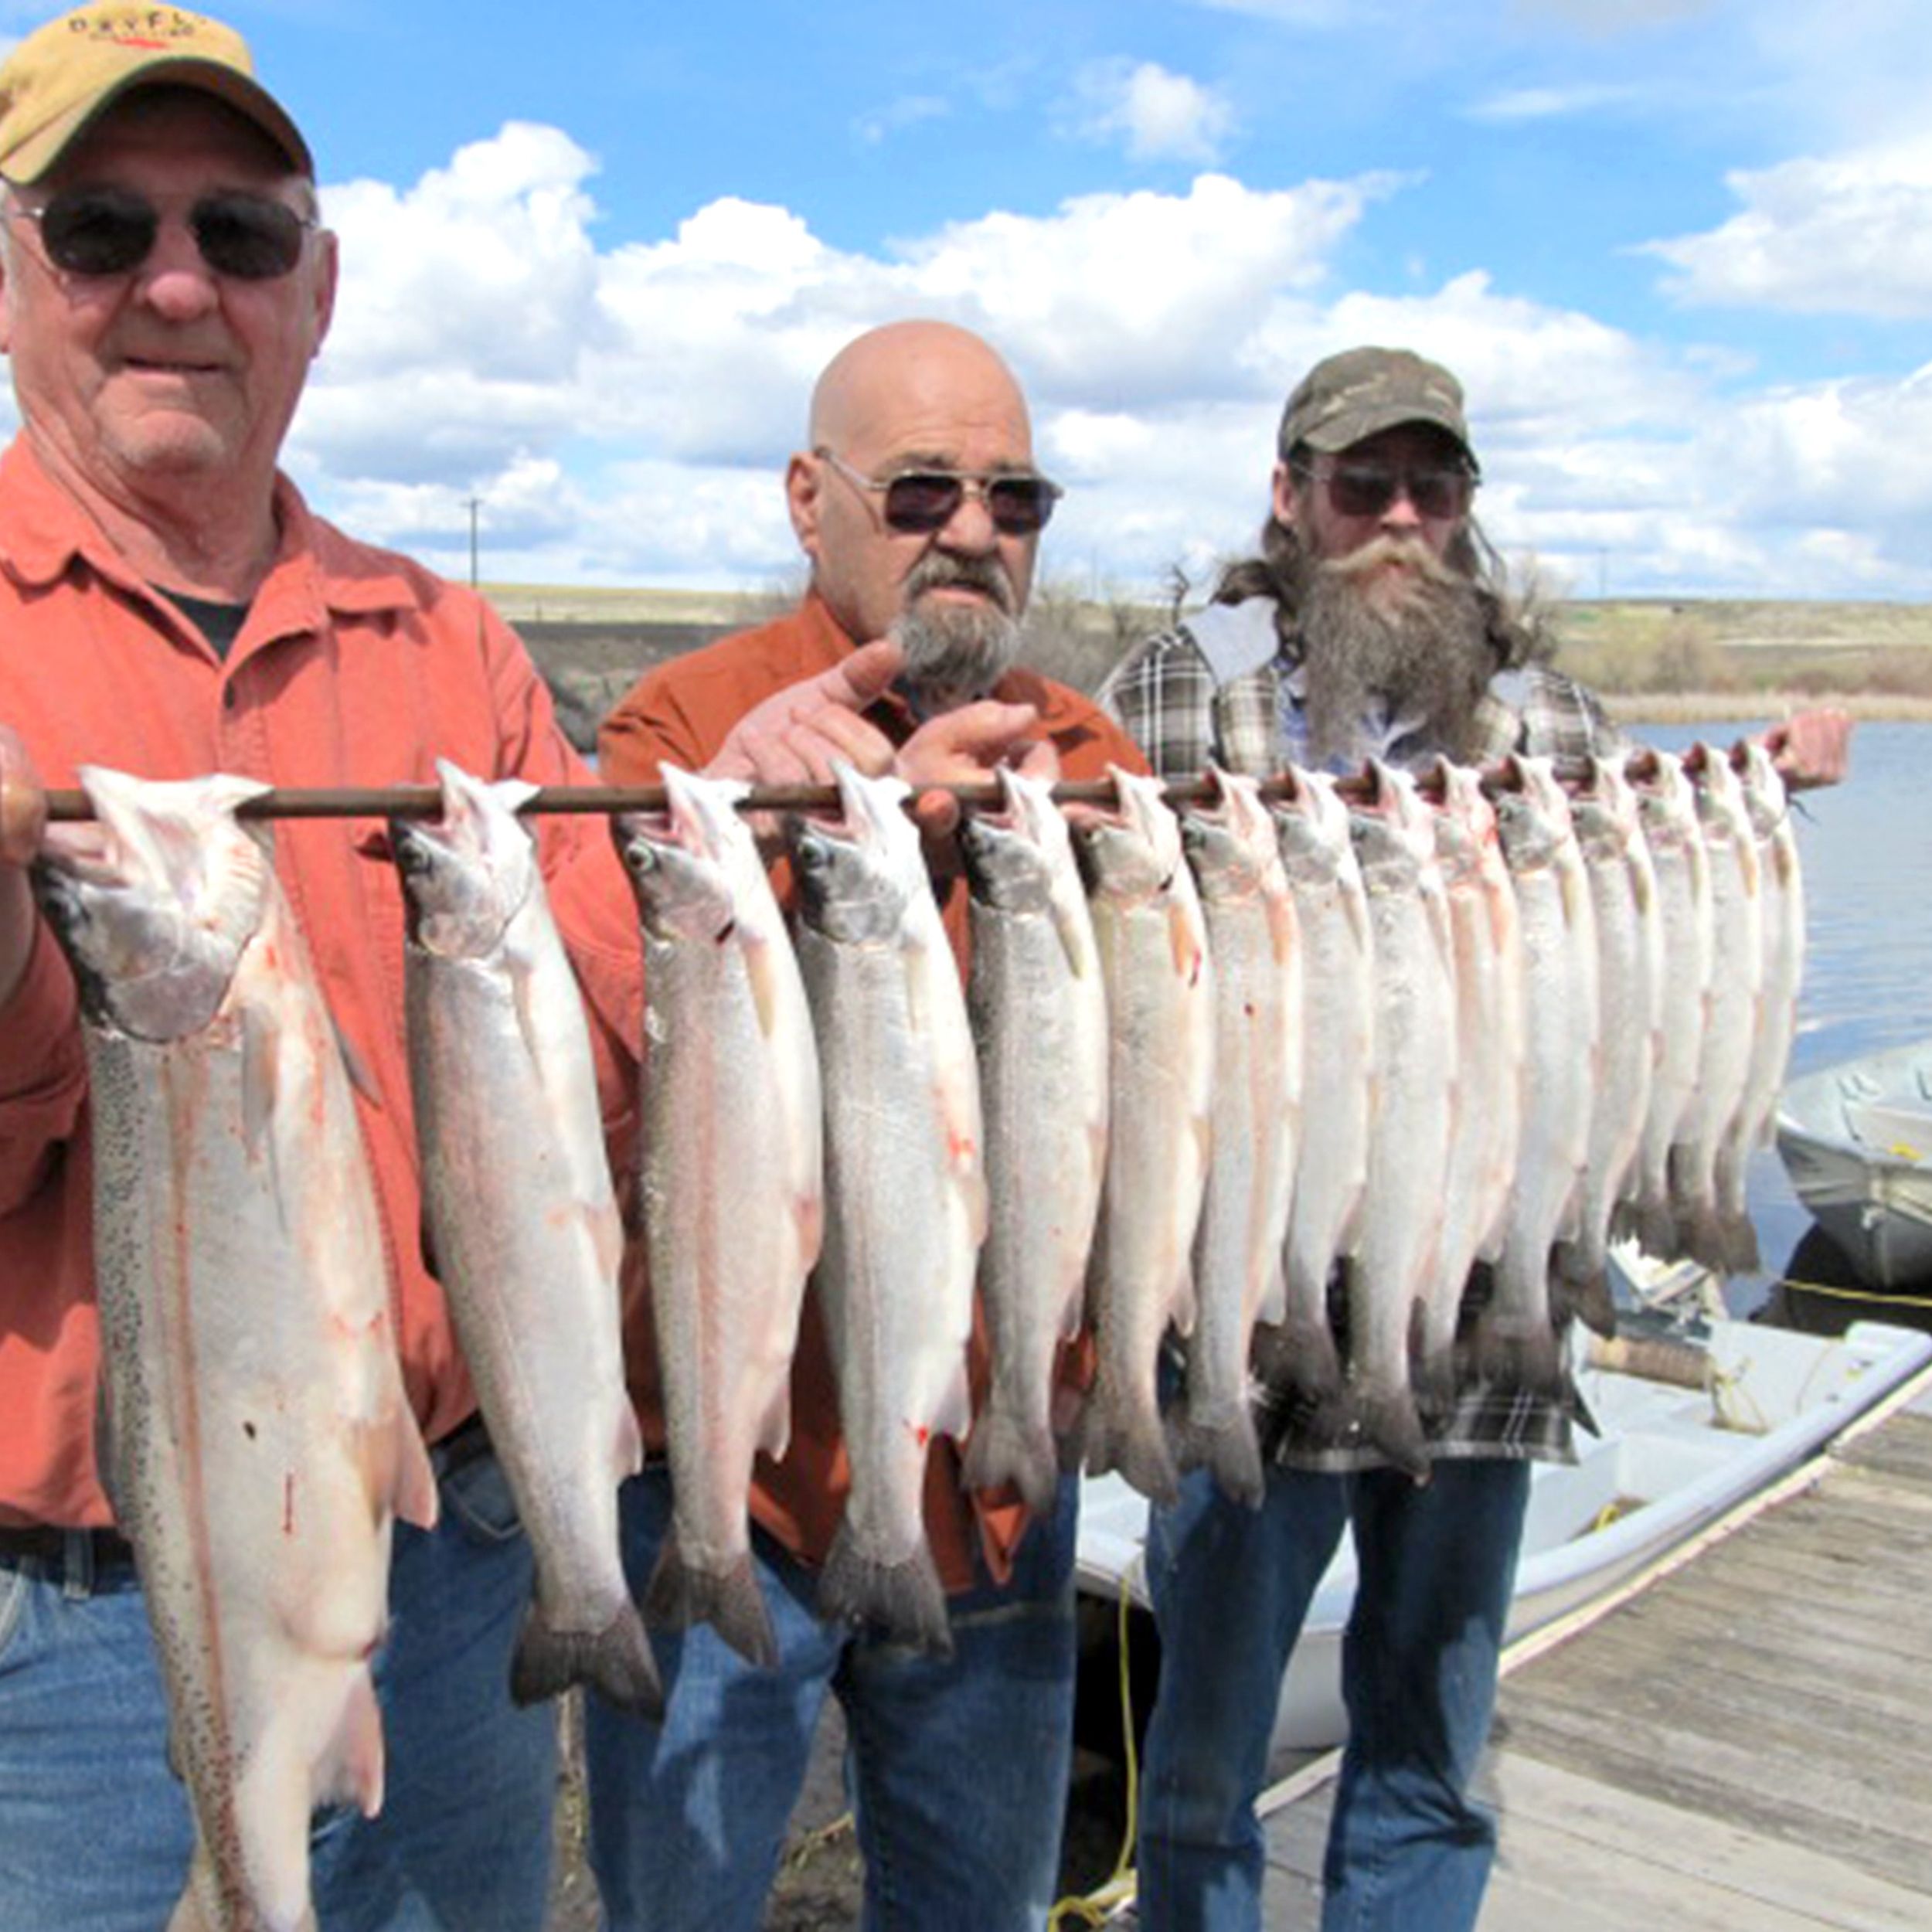 Sprague Lake offers anglers rare opportunity to catch healthy-size